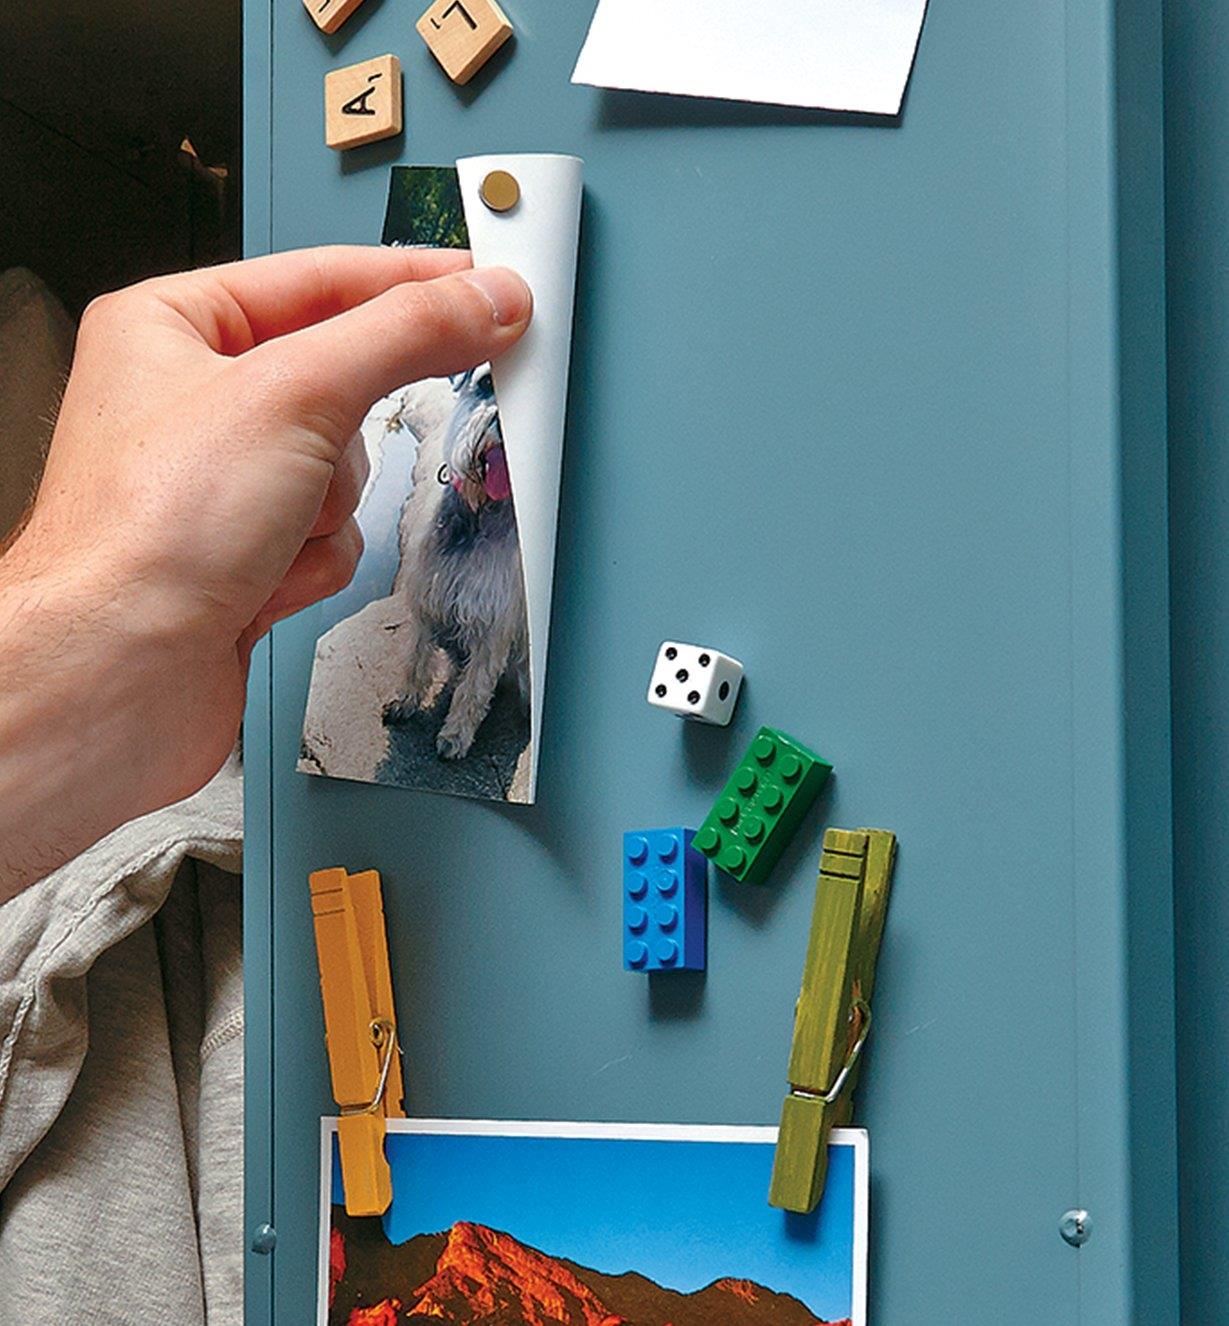 Hanging pictures and small items on a locker door using adhesive-backed magnets